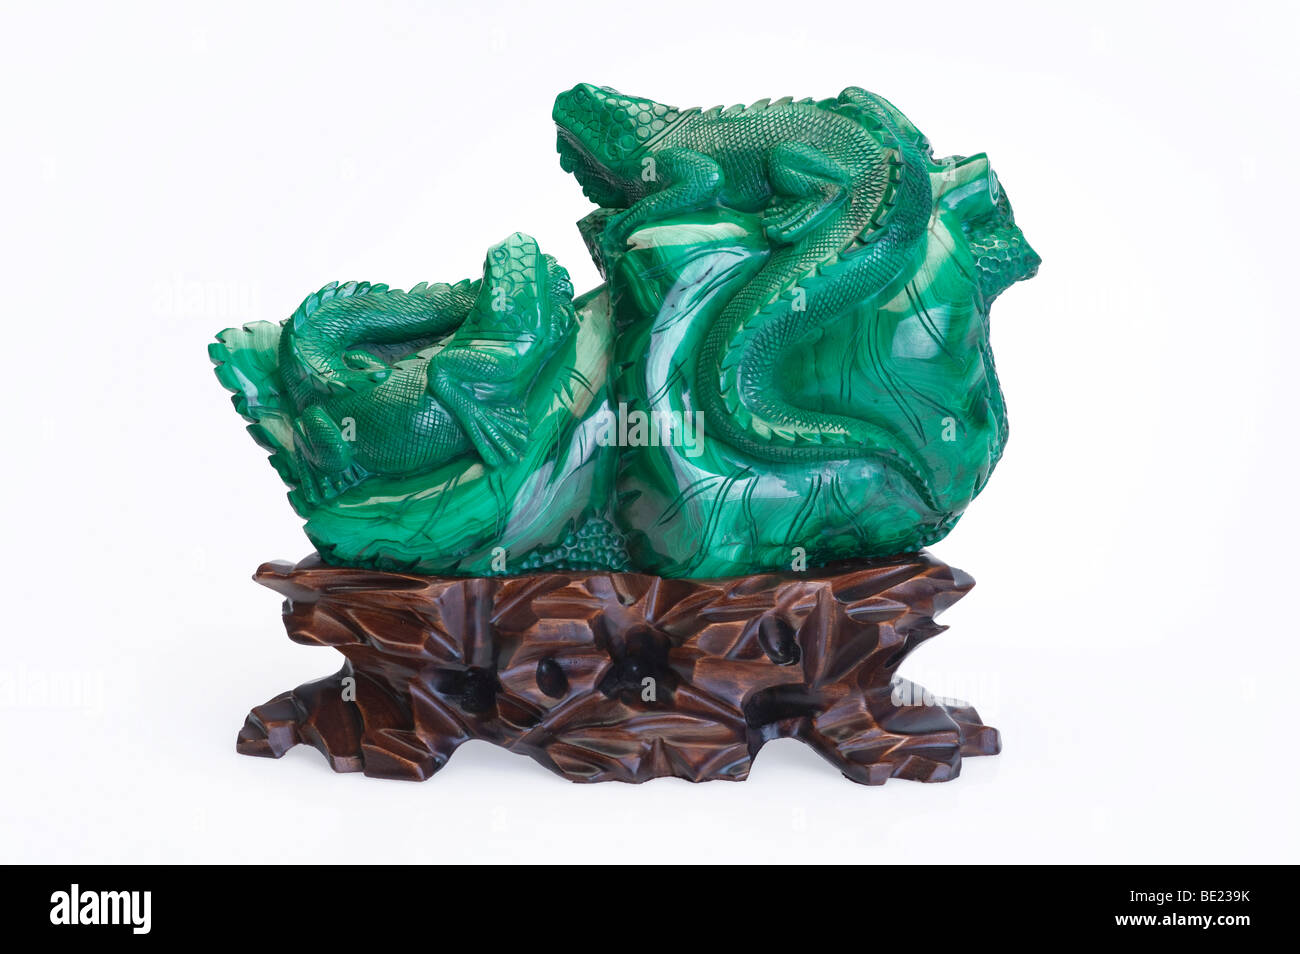 Malachite mineral carving, 'lizards', polished on white background Stock Photo